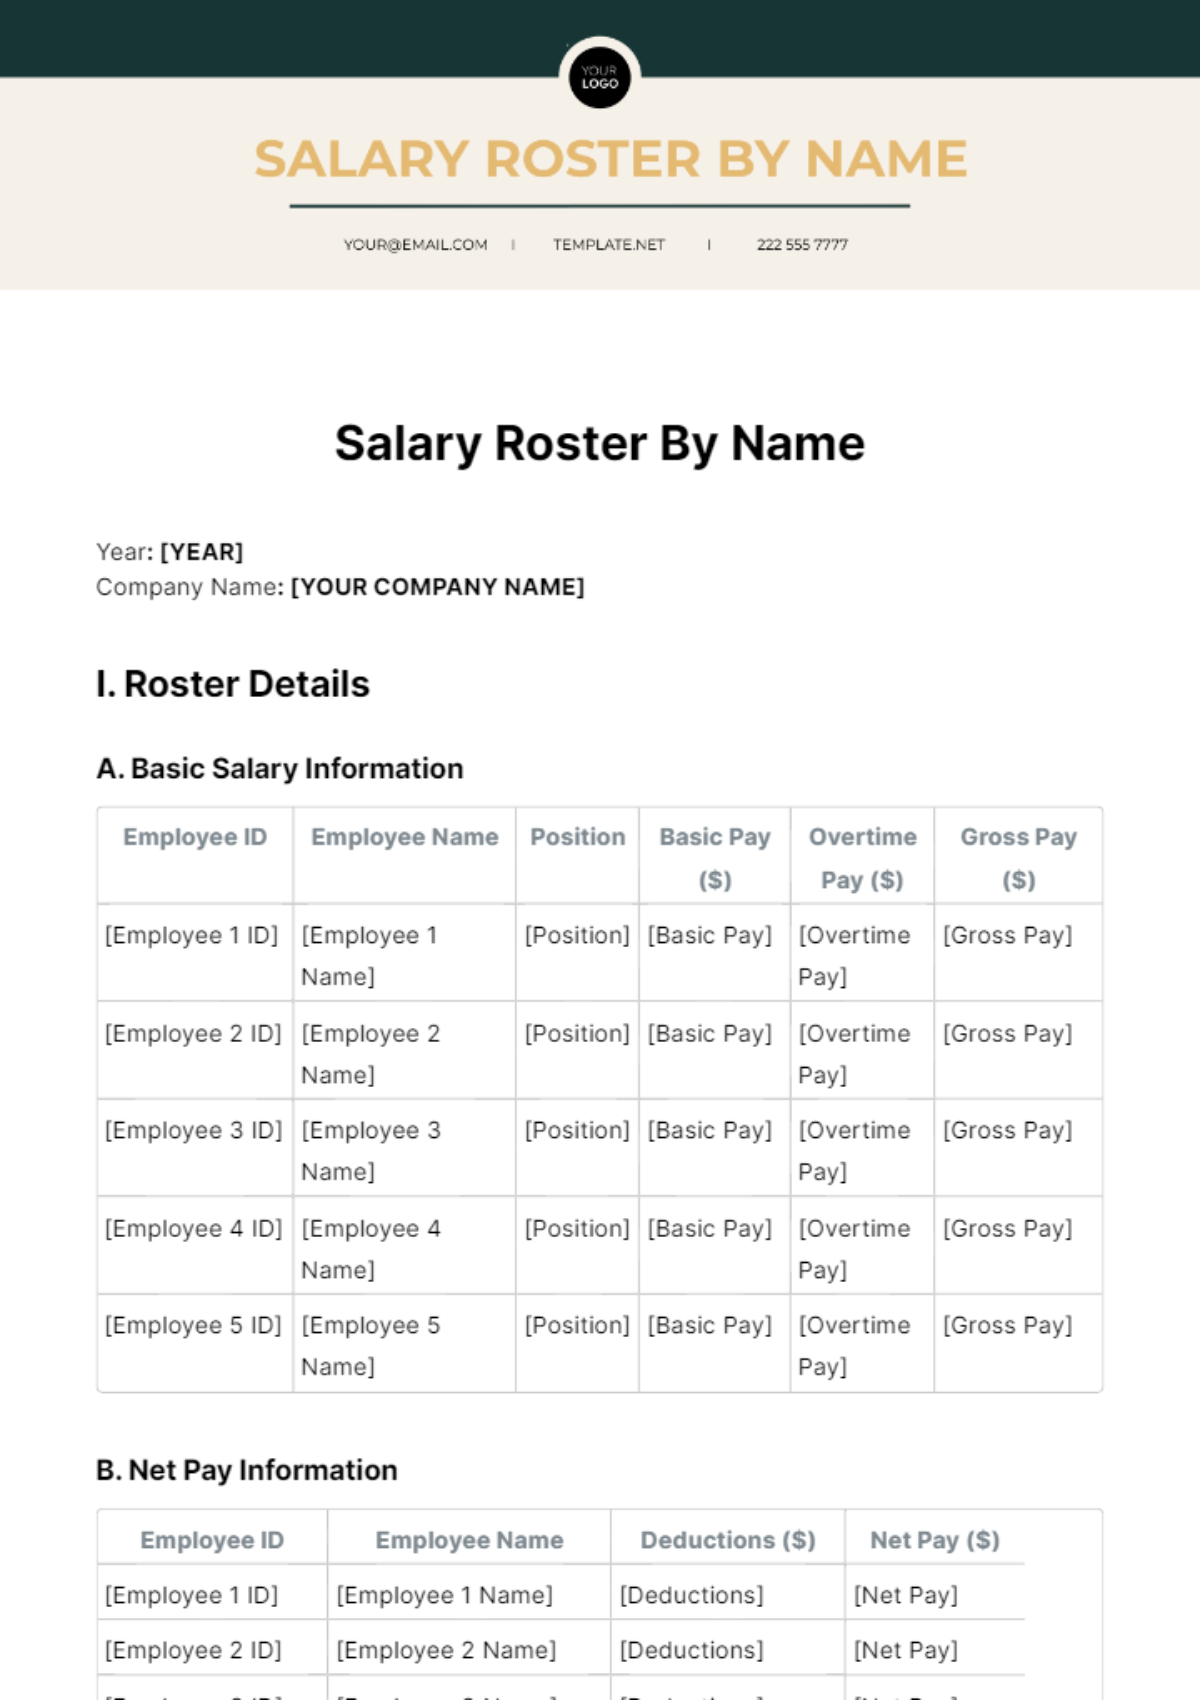 Salary Roster By Name Template